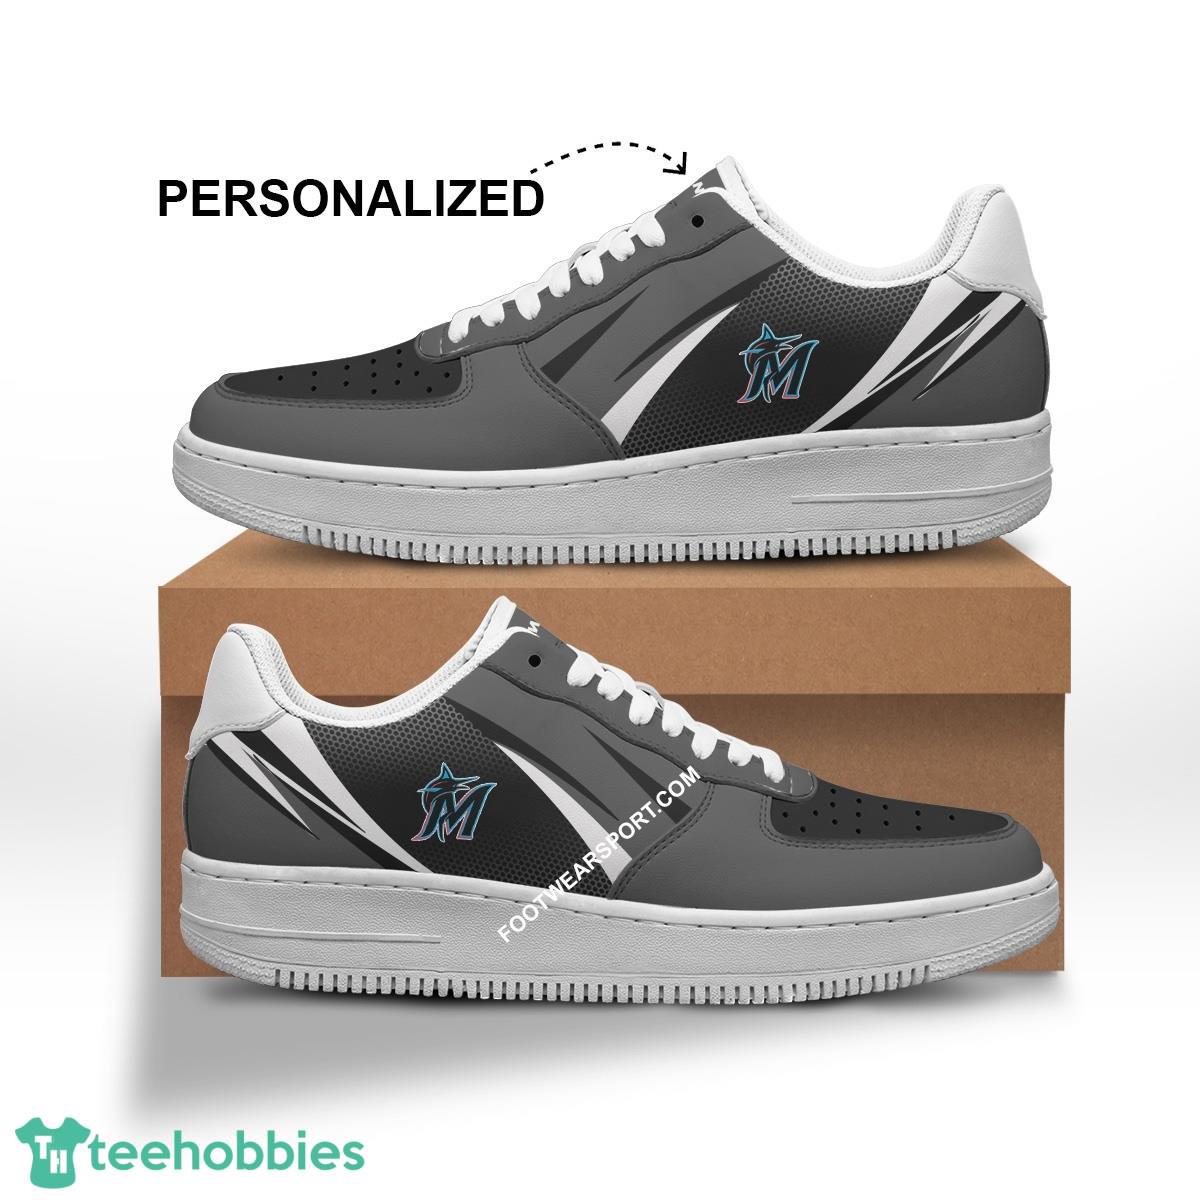 Custom Name Miami Marlins Air Force 1 Shoes Trending Design Gift For Men Women Fans - MLB Miami Marlins Air Force 1 Shoes Personalized Style 1